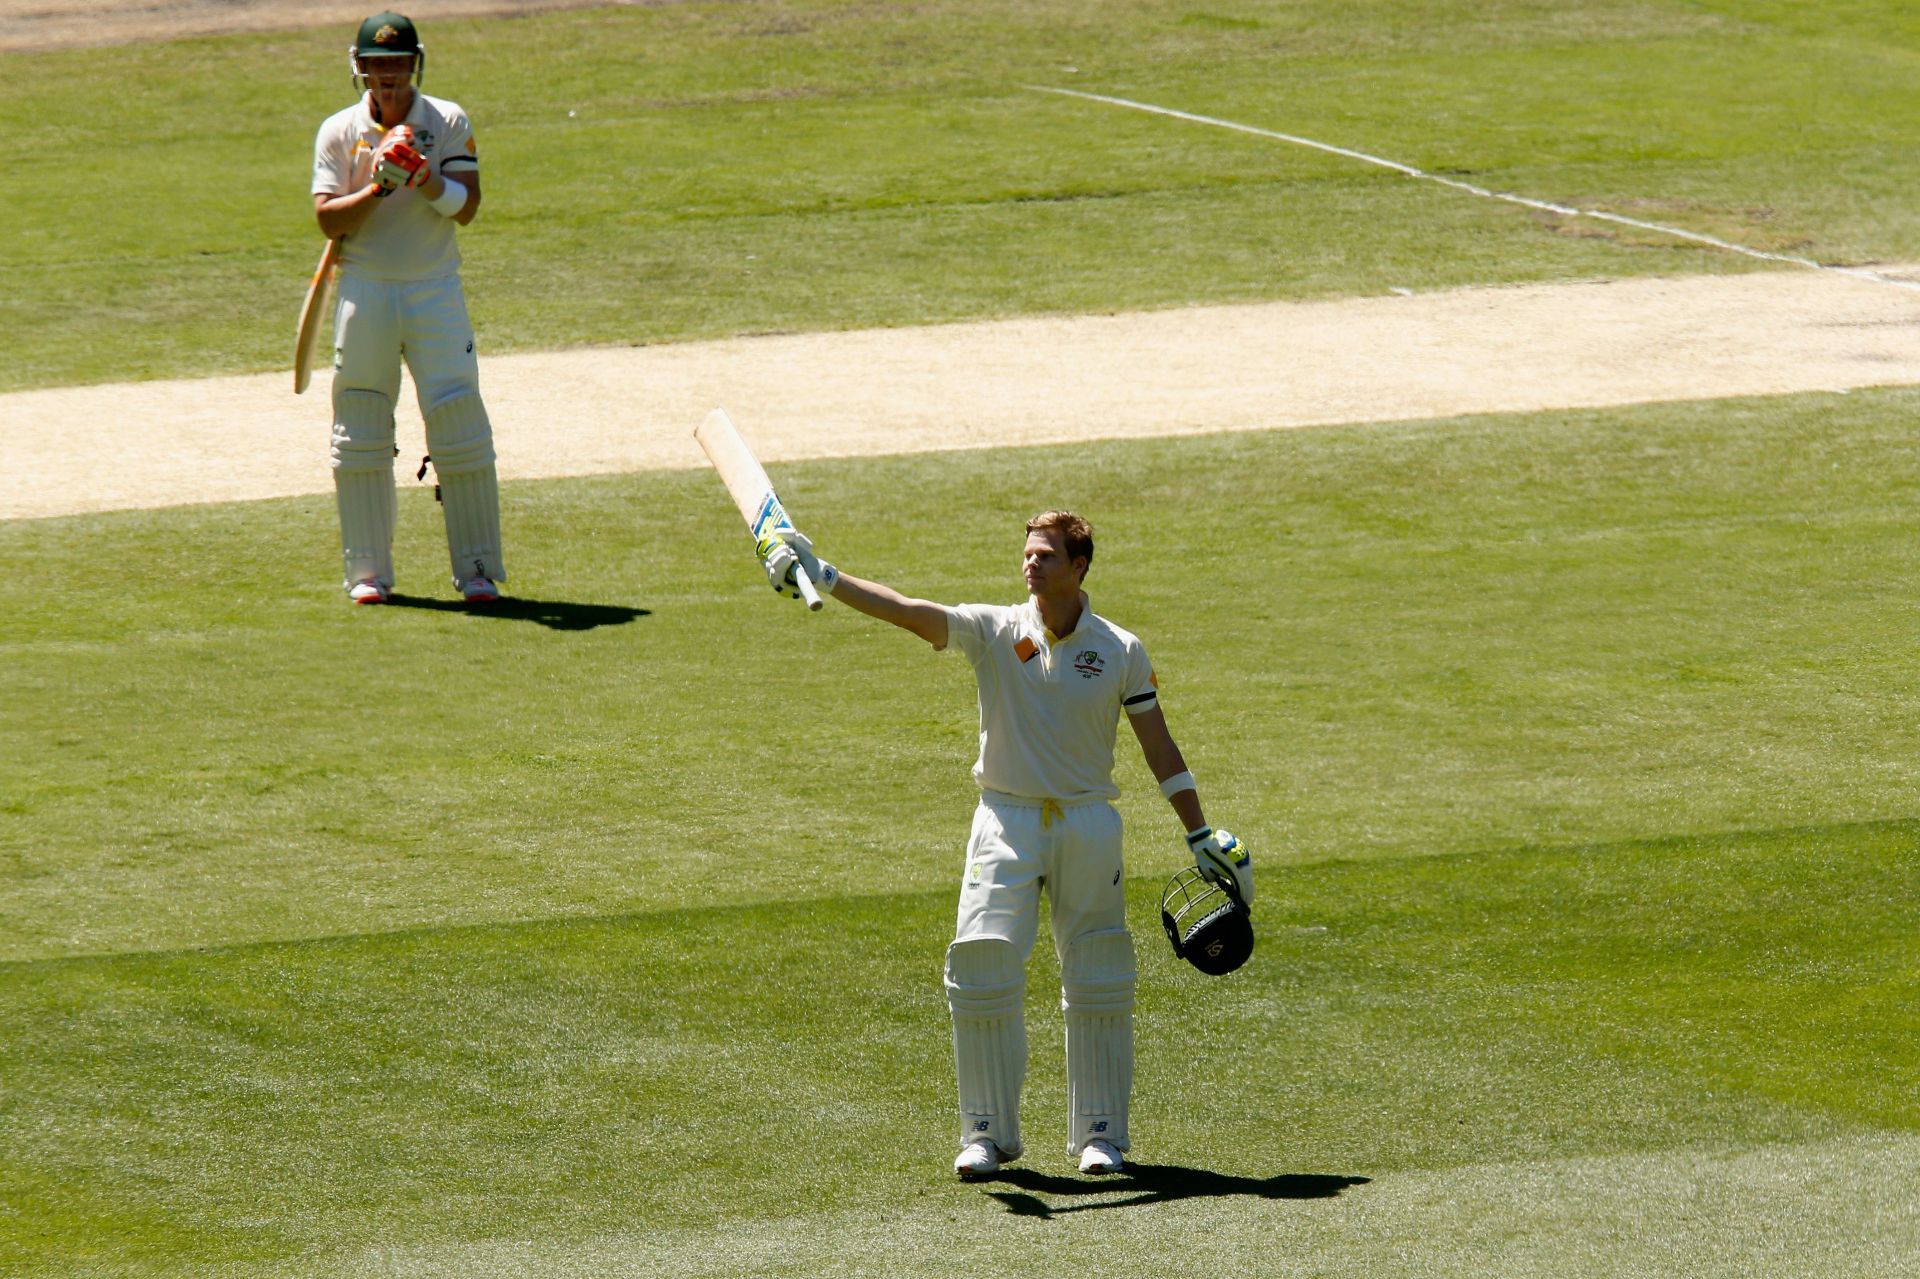 Steve Smith was unstoppable against India at the MCG in 2014!